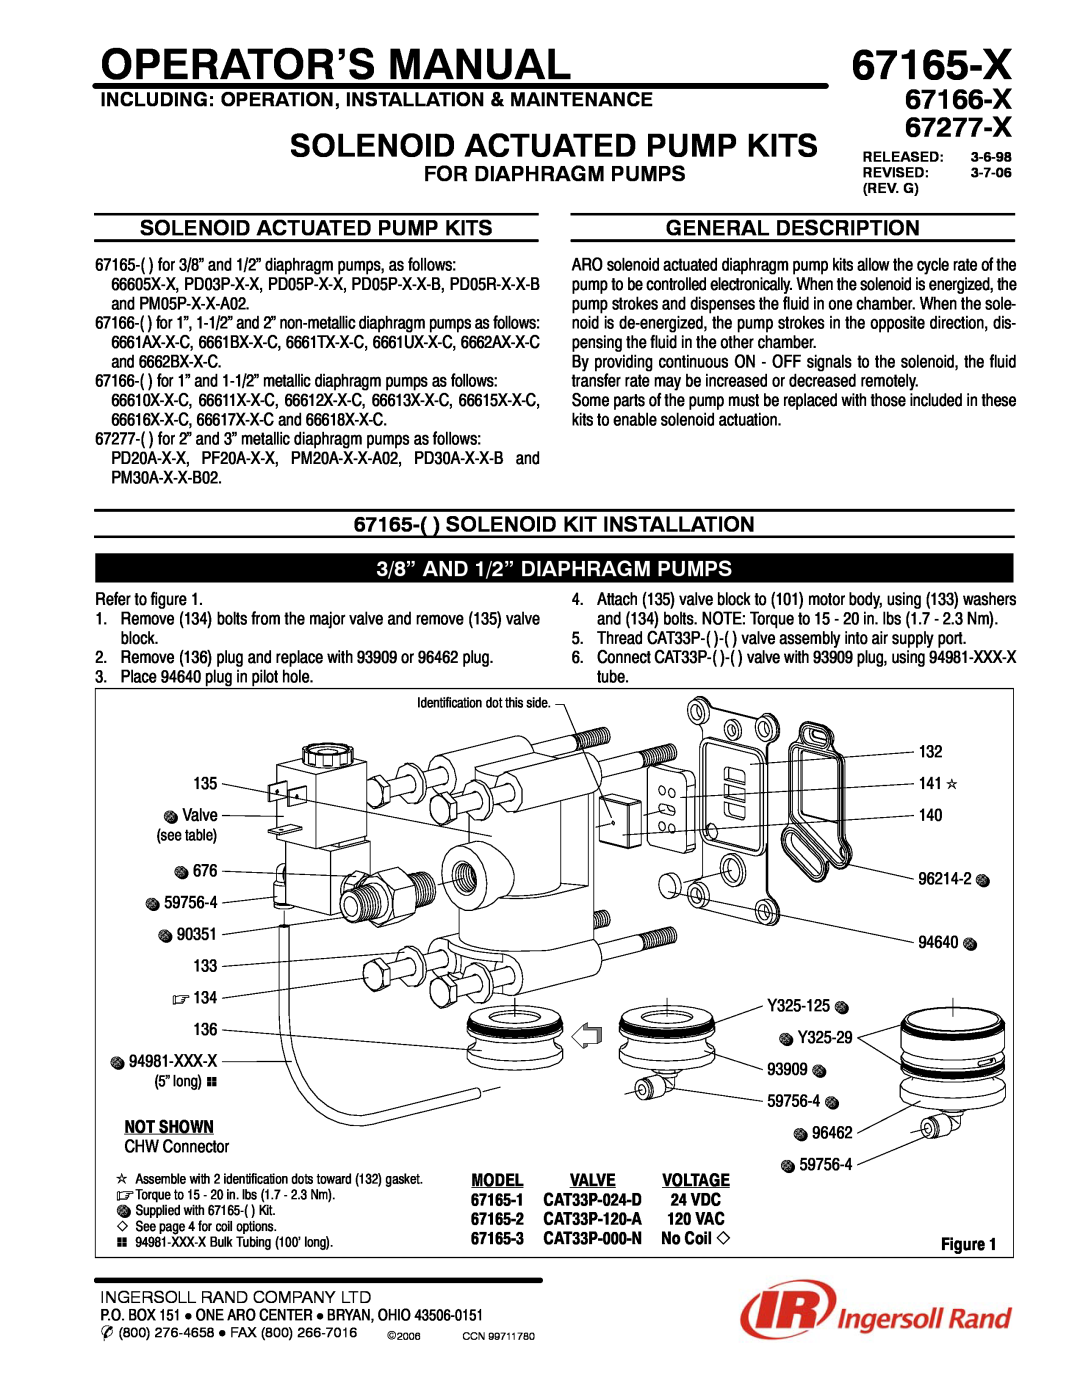 Ingersoll-Rand 67277-X manual For Diaphragm Pumps, Solenoid Actuated Pump Kits, Solenoid Kit Installation, 67165-X 